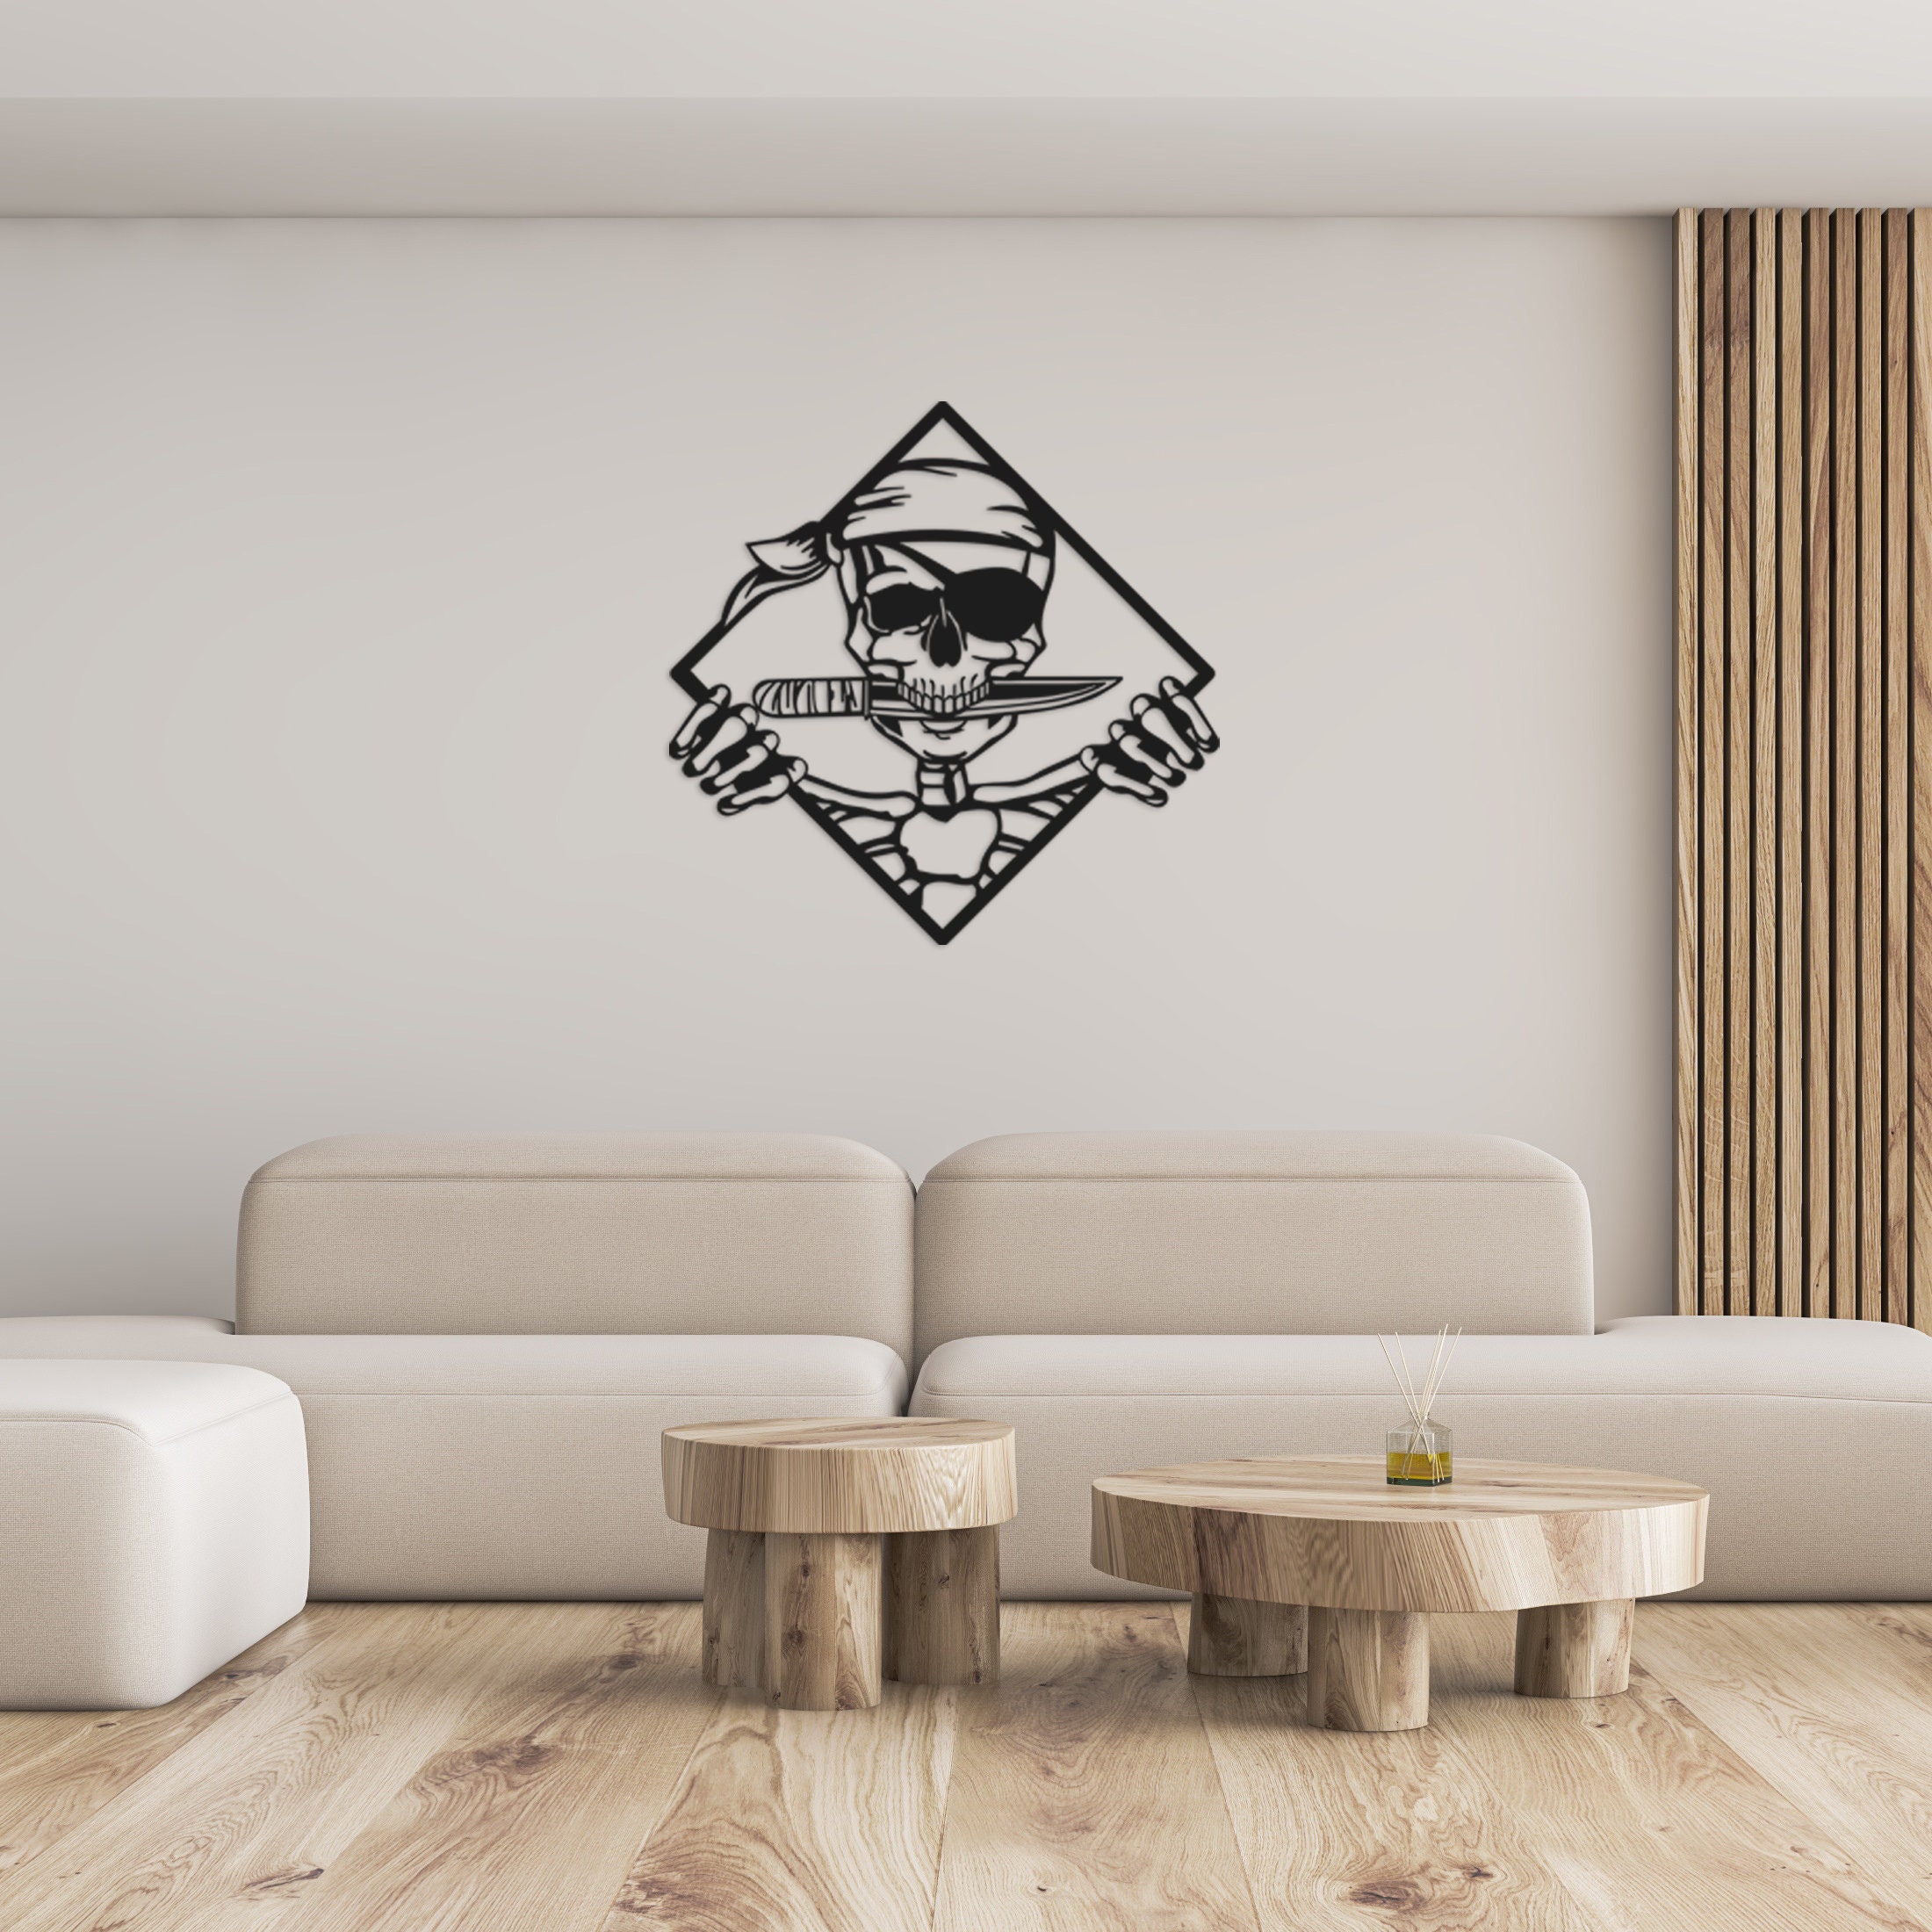 Pirate Metal Wall Art, Metal Pirate Outdoor Pirate Decor, Pirate Decor for  Home, Pirate Halloween Decorations, Best Gift for Kids Room Decor -   Canada